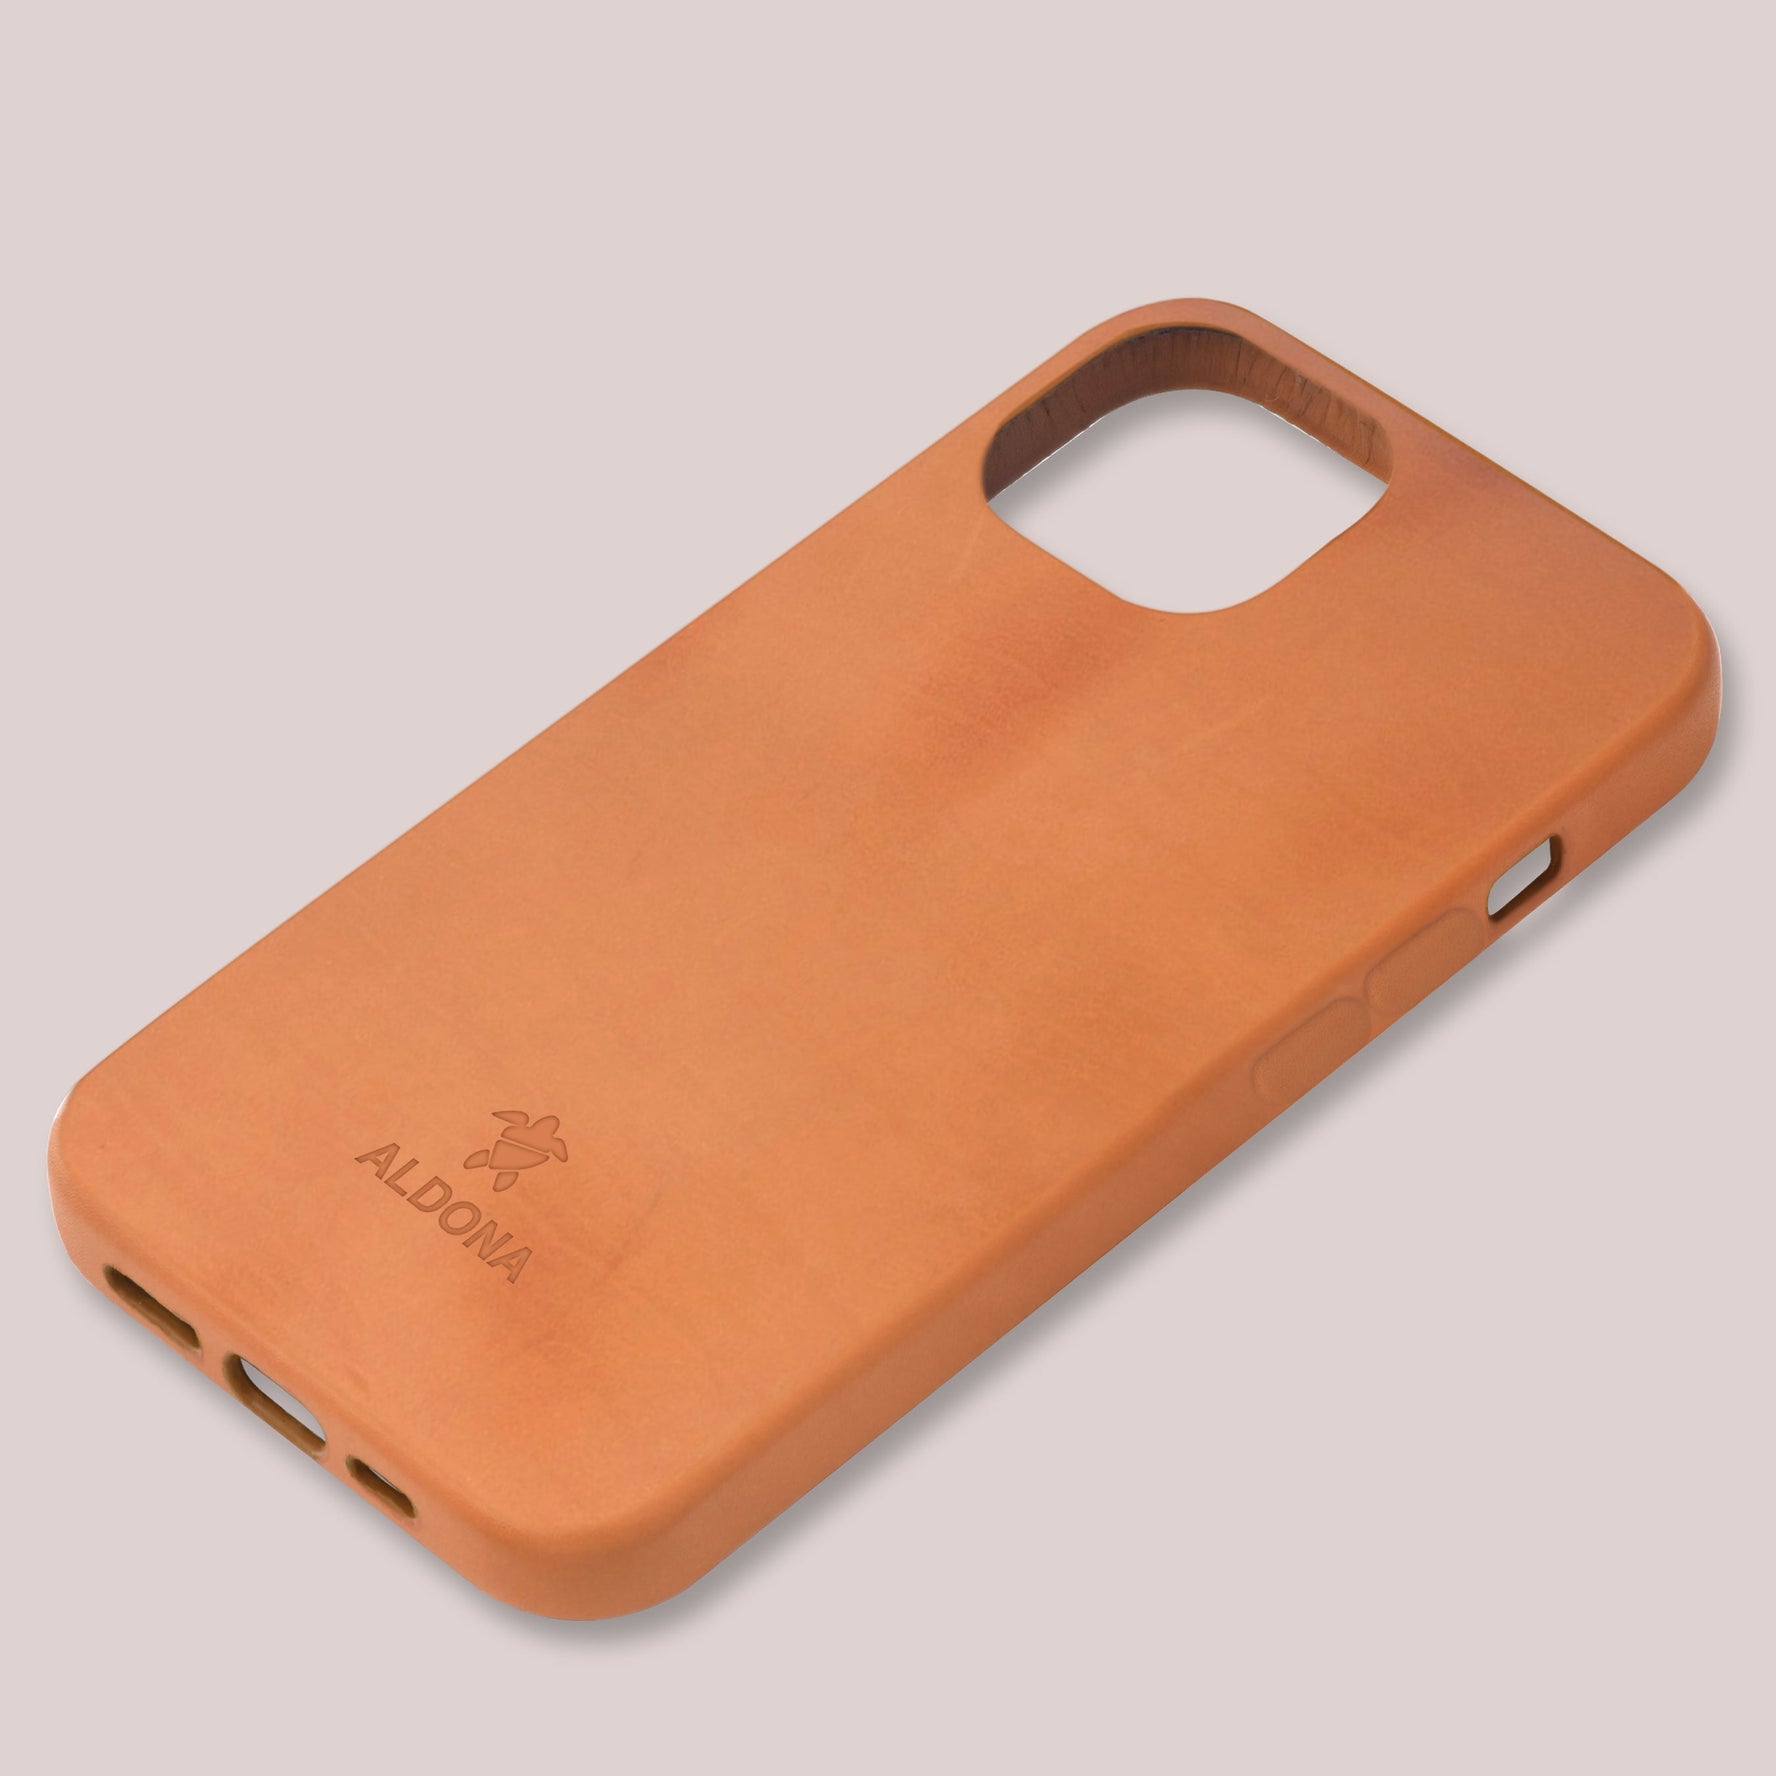 Kalon Case for iPhone 14 Pro with MagSafe Compatibility - Vintage Tan